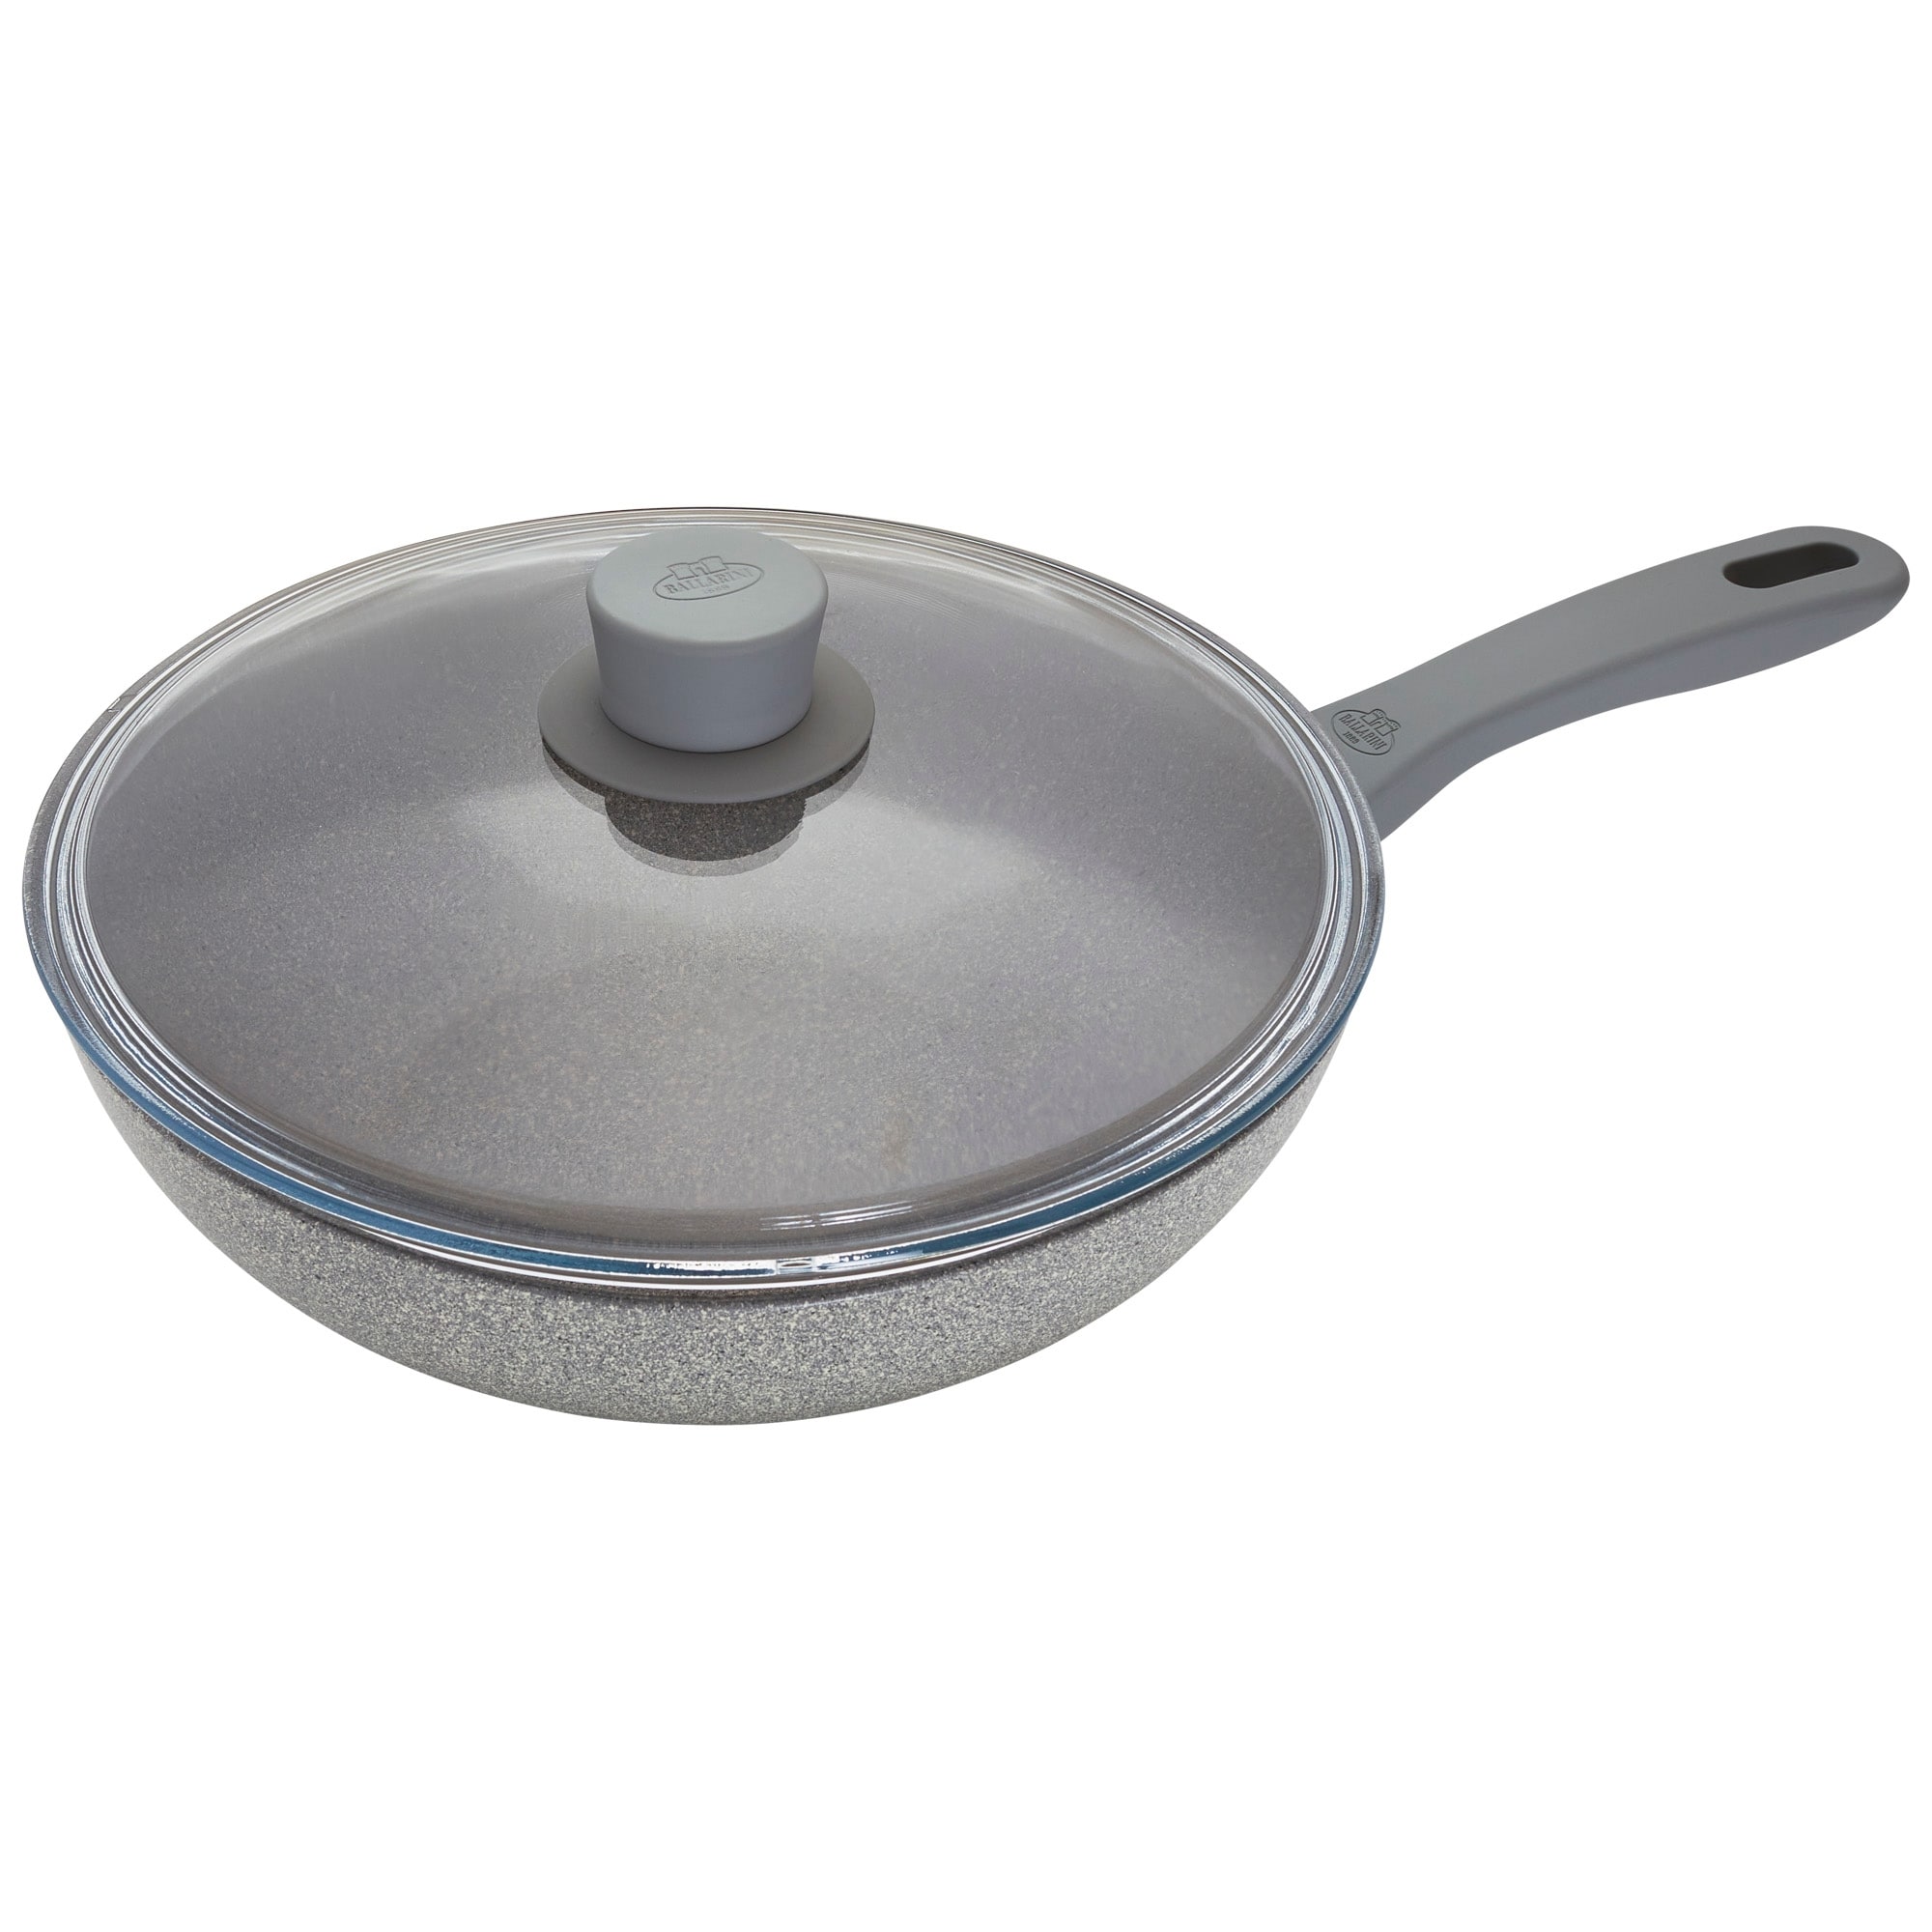 https://ak1.ostkcdn.com/images/products/is/images/direct/a188c6b08aeae59dfa48ee927387275351e47b10/Ballarini-Parma-Plus-11-inch-Aluminum-Nonstick-Stir-Fry-Pan-with-Lid.jpg